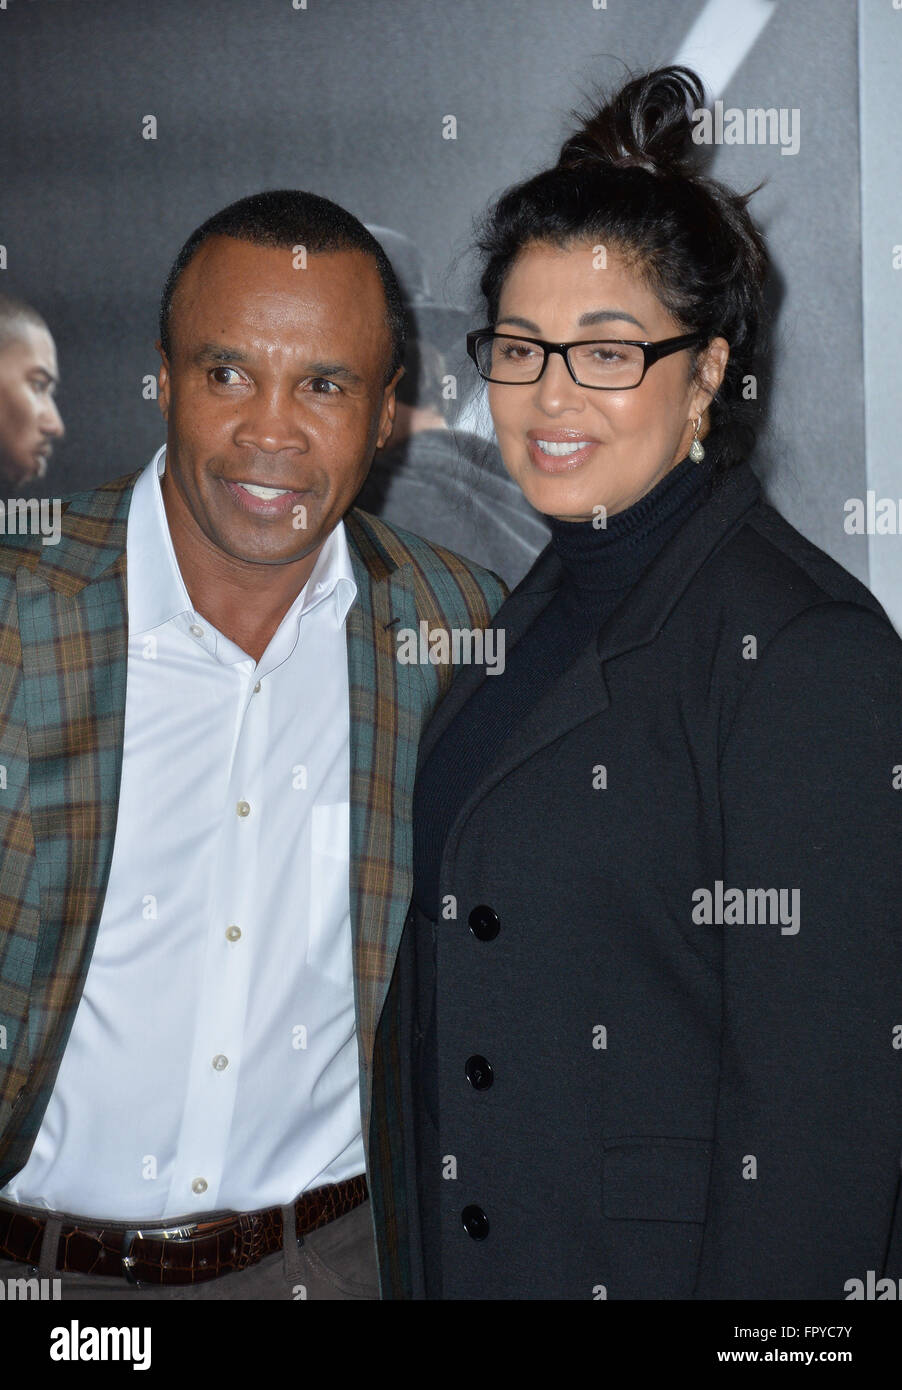 LOS ANGELES, CA - NOVEMBER 19, 2015: Former boxer Sugar Ray Leonard & wife Bernadette Robi at the Los Angeles World premiere of "Creed" at the Regency Village Theatre, Westwood. Stock Photo